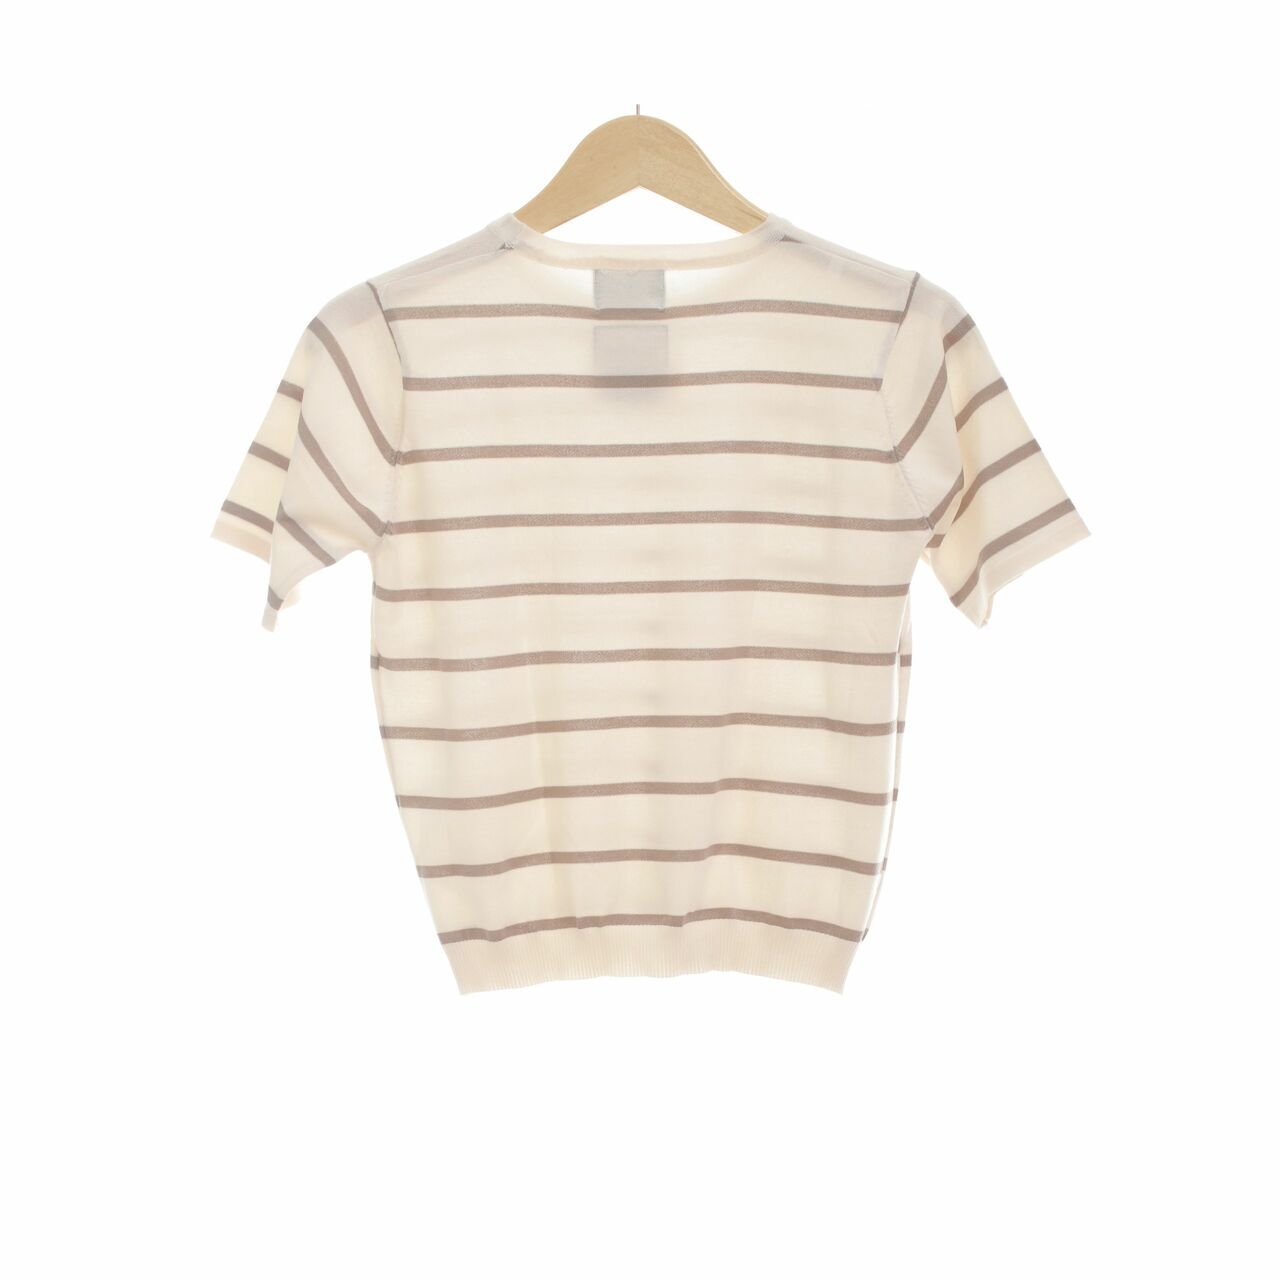 This is April Cream Stripes Knit Blouse